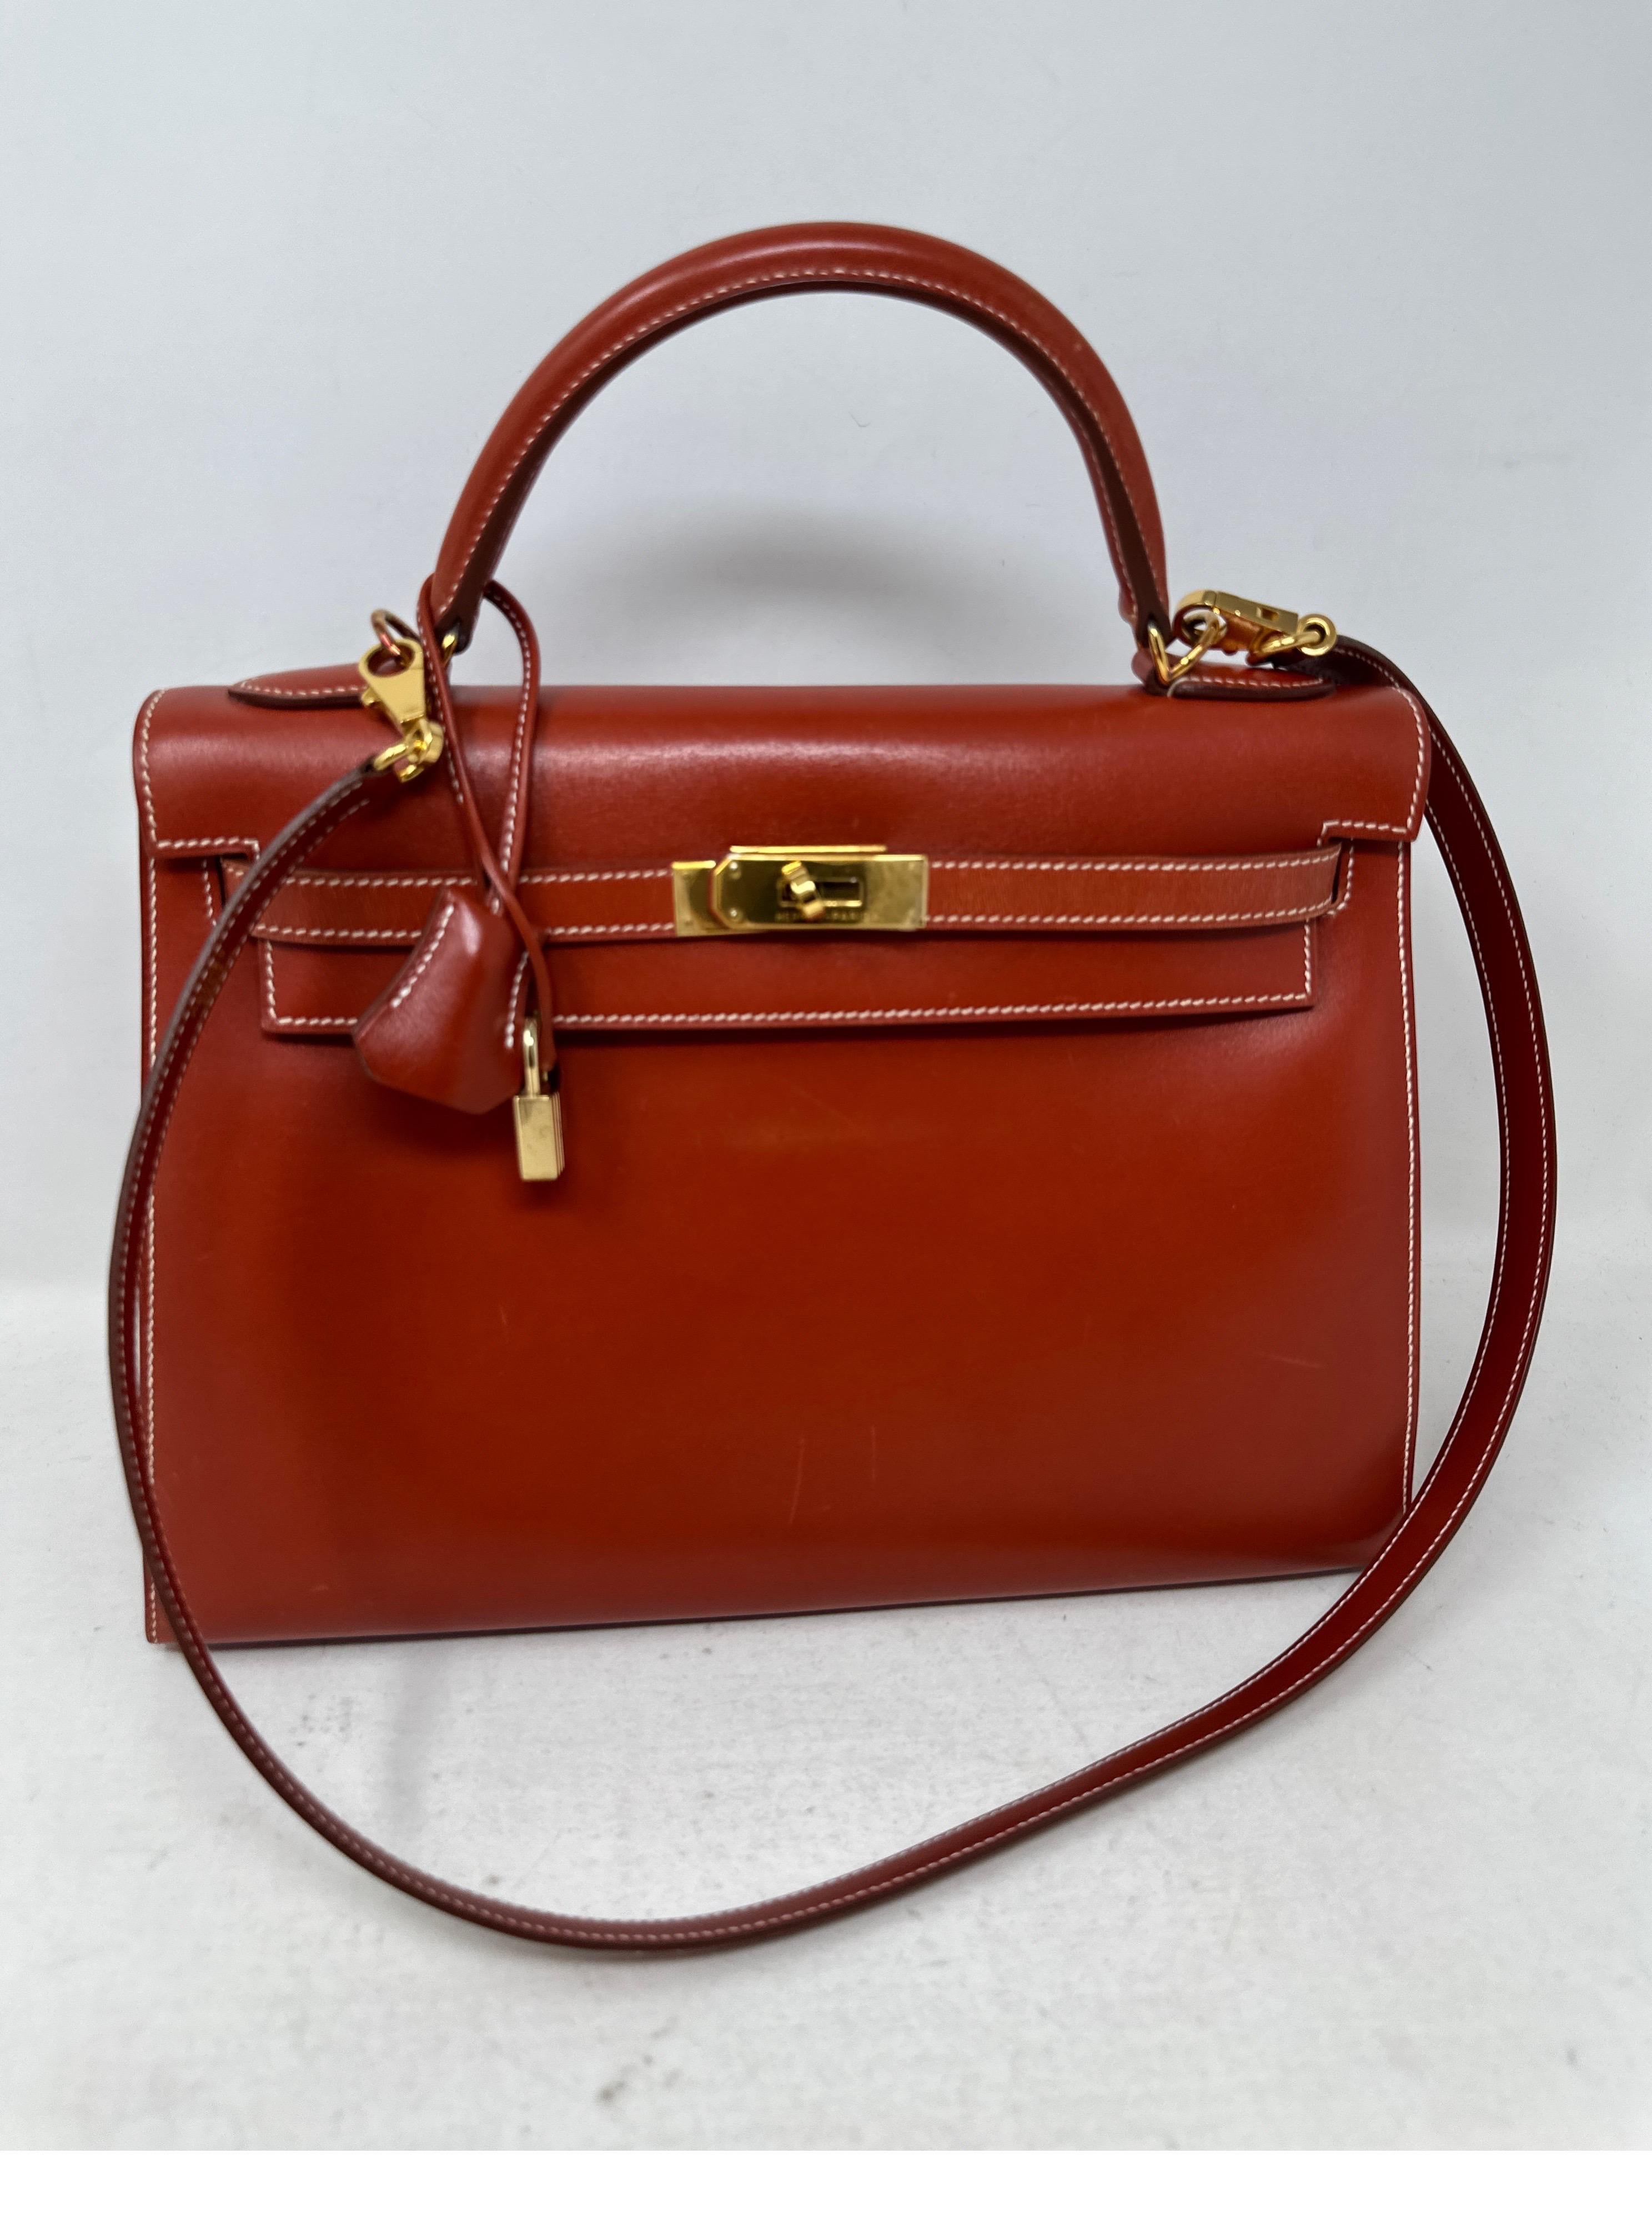 Hermes Brique Kelly 32 Bag. Beautiful swift leather bag. Contrast white stitching. Stunning color with cream leather interior. Clean inside. Corners look great. Light surface scratches in front. See photos please. Overall good condition especially